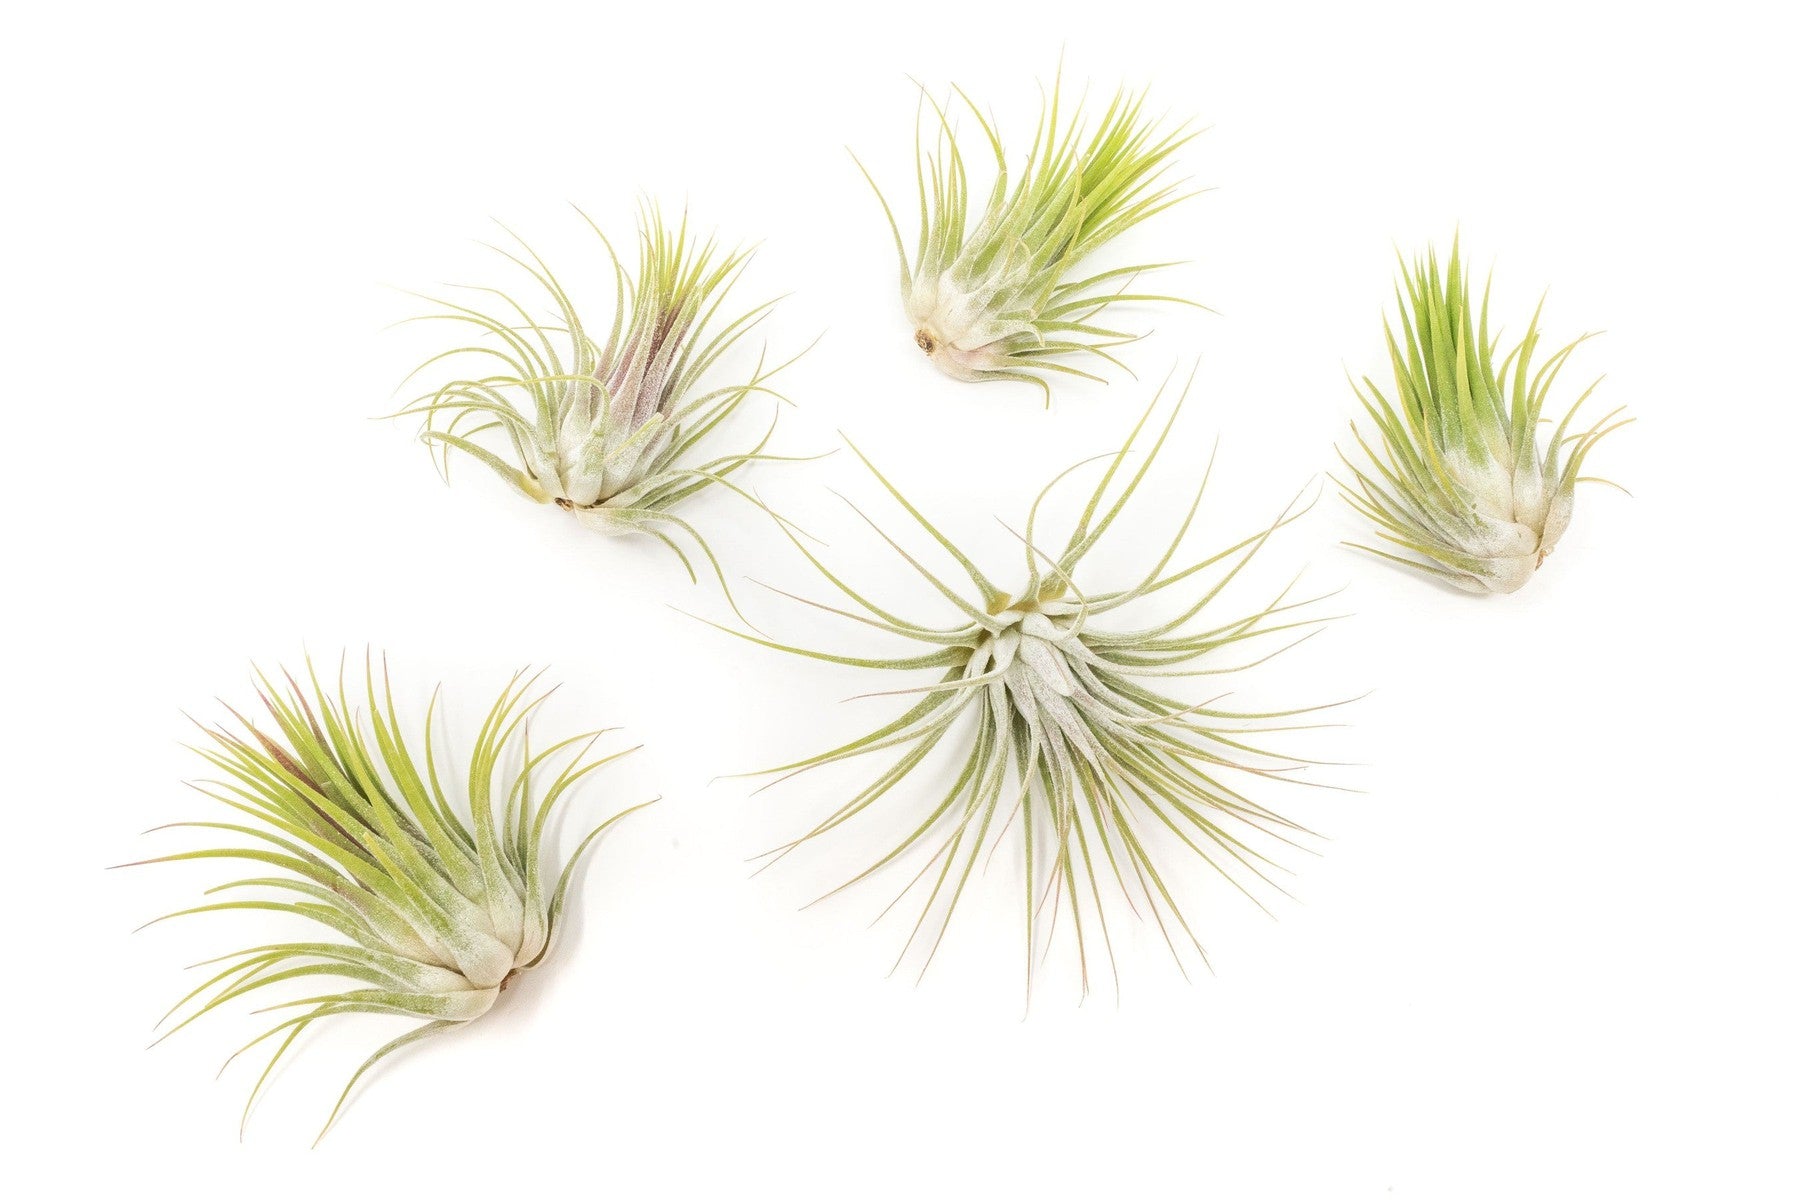 SALE - XL Tillandsia Ionantha Guatemala Air Plants - Set of 10 or 20 - 40% Off-airplant-The Succulent Source